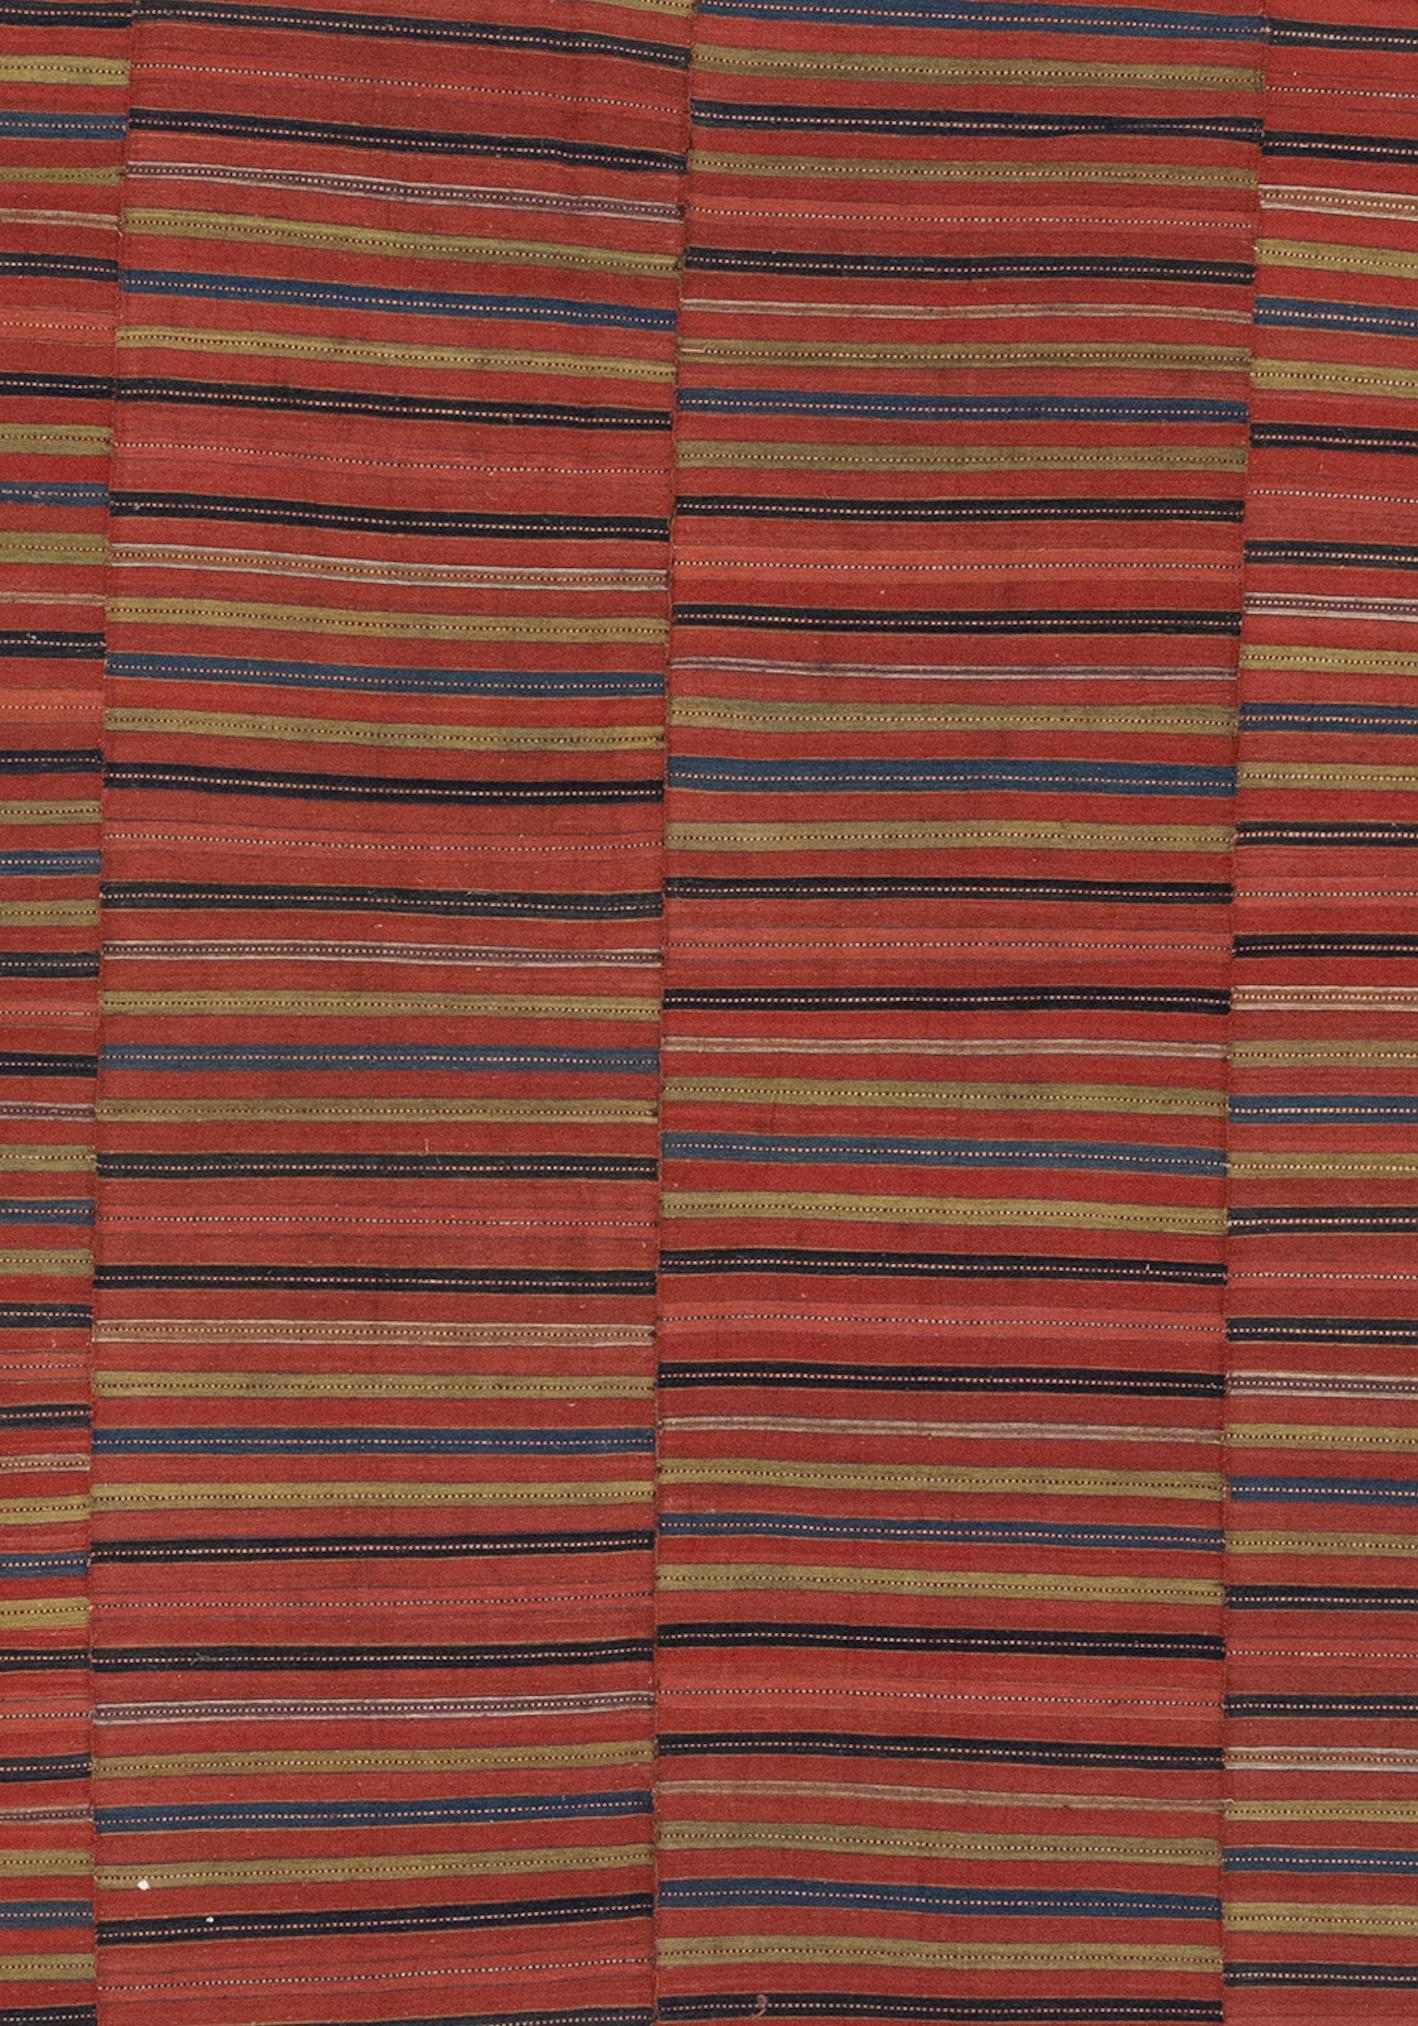 This is a vintage Kilim rug circa 1900. This rug is magnificent considering the complicity of pattern and color. Very finely woven.

Kilims are pile less textiles often produced by using flat weaving techniques. The word “kilim” comes from Turkish